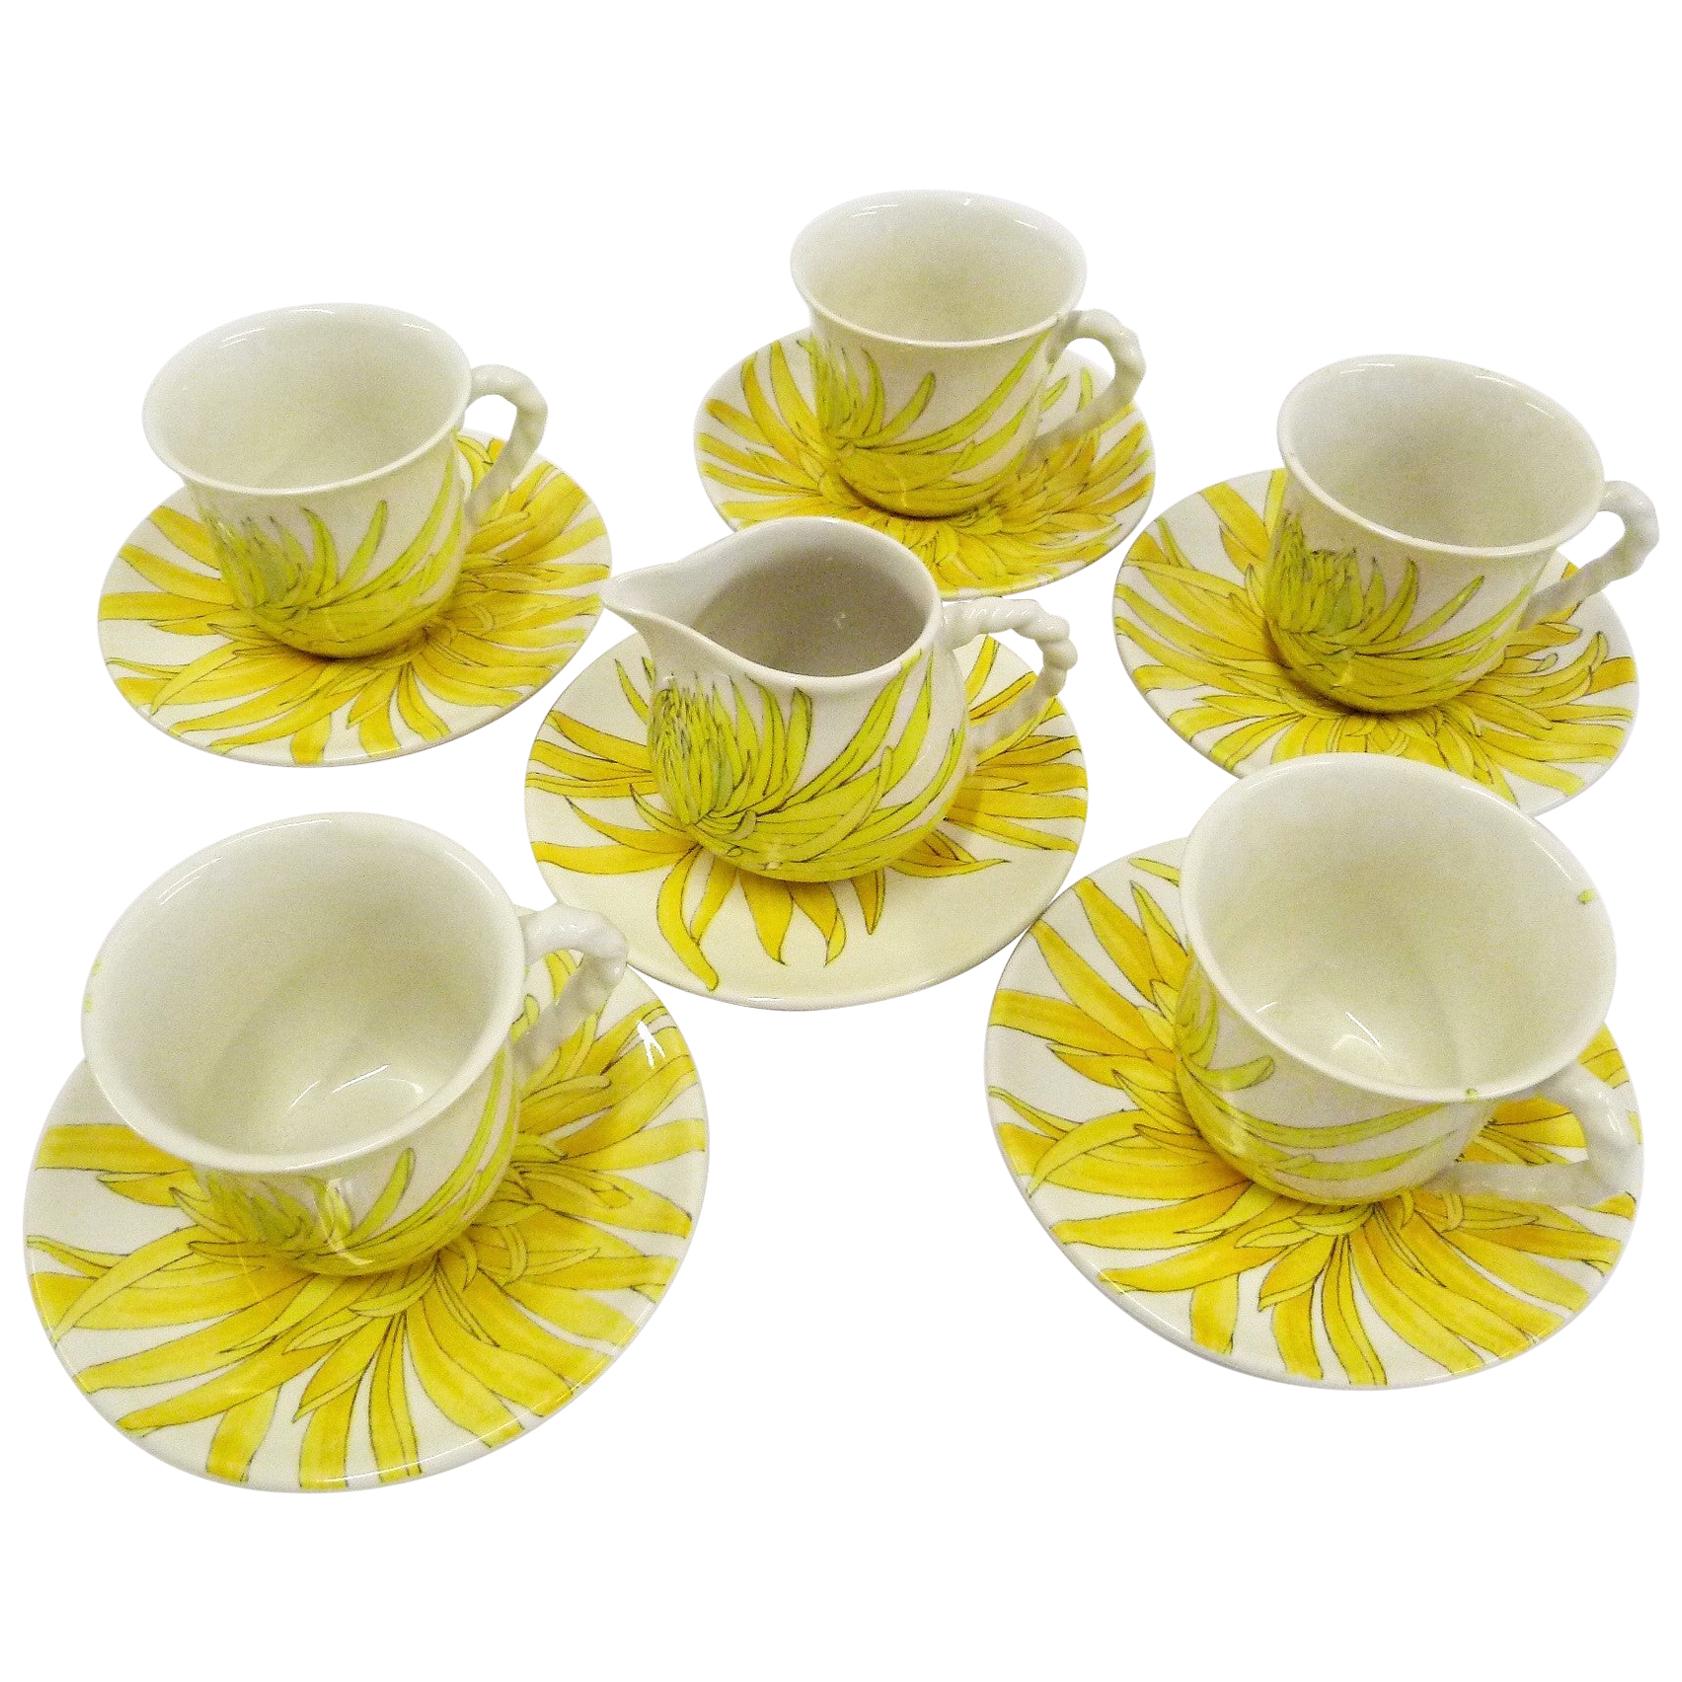 Ceramiche Ernestine, Salerno Italy Chrysanthemum Cups Saucers and Creamer, 1950s